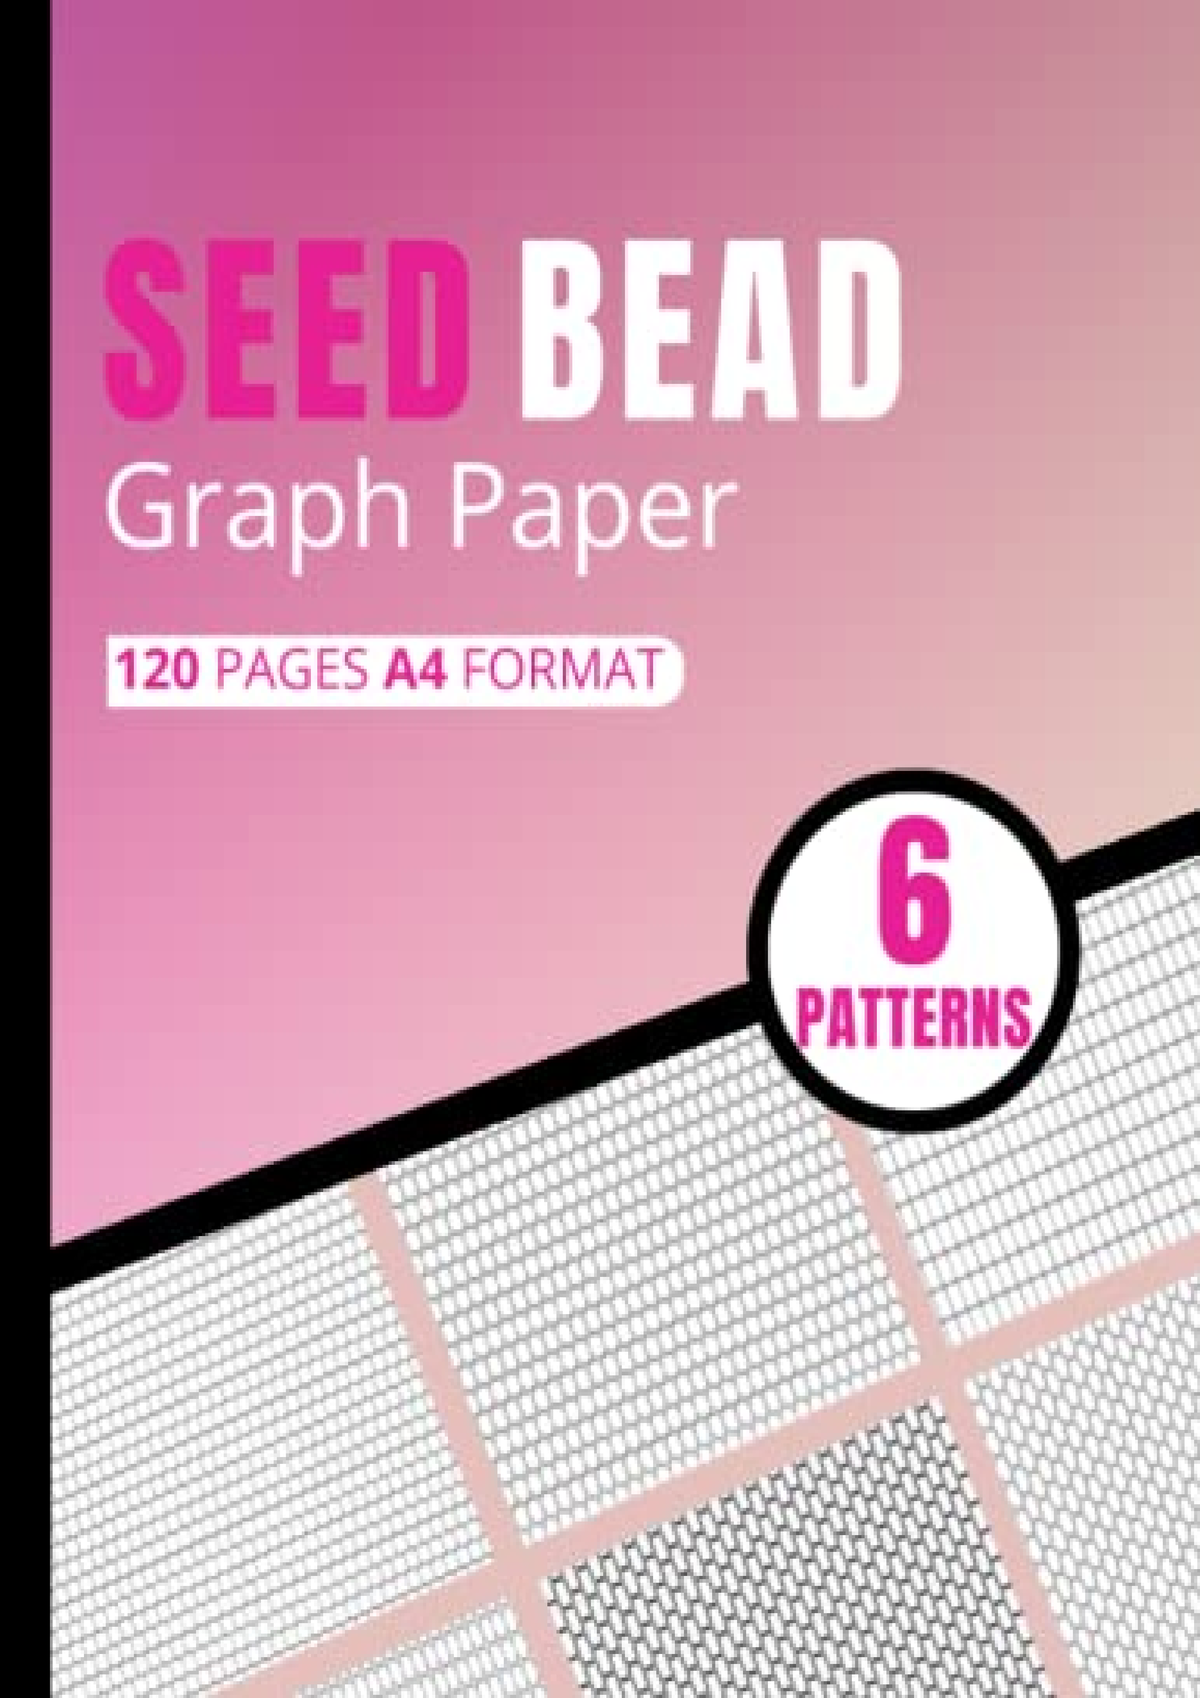 Read ebook [PDF] Seed Bead Graph Paper: Beading Graph Paper to create ...